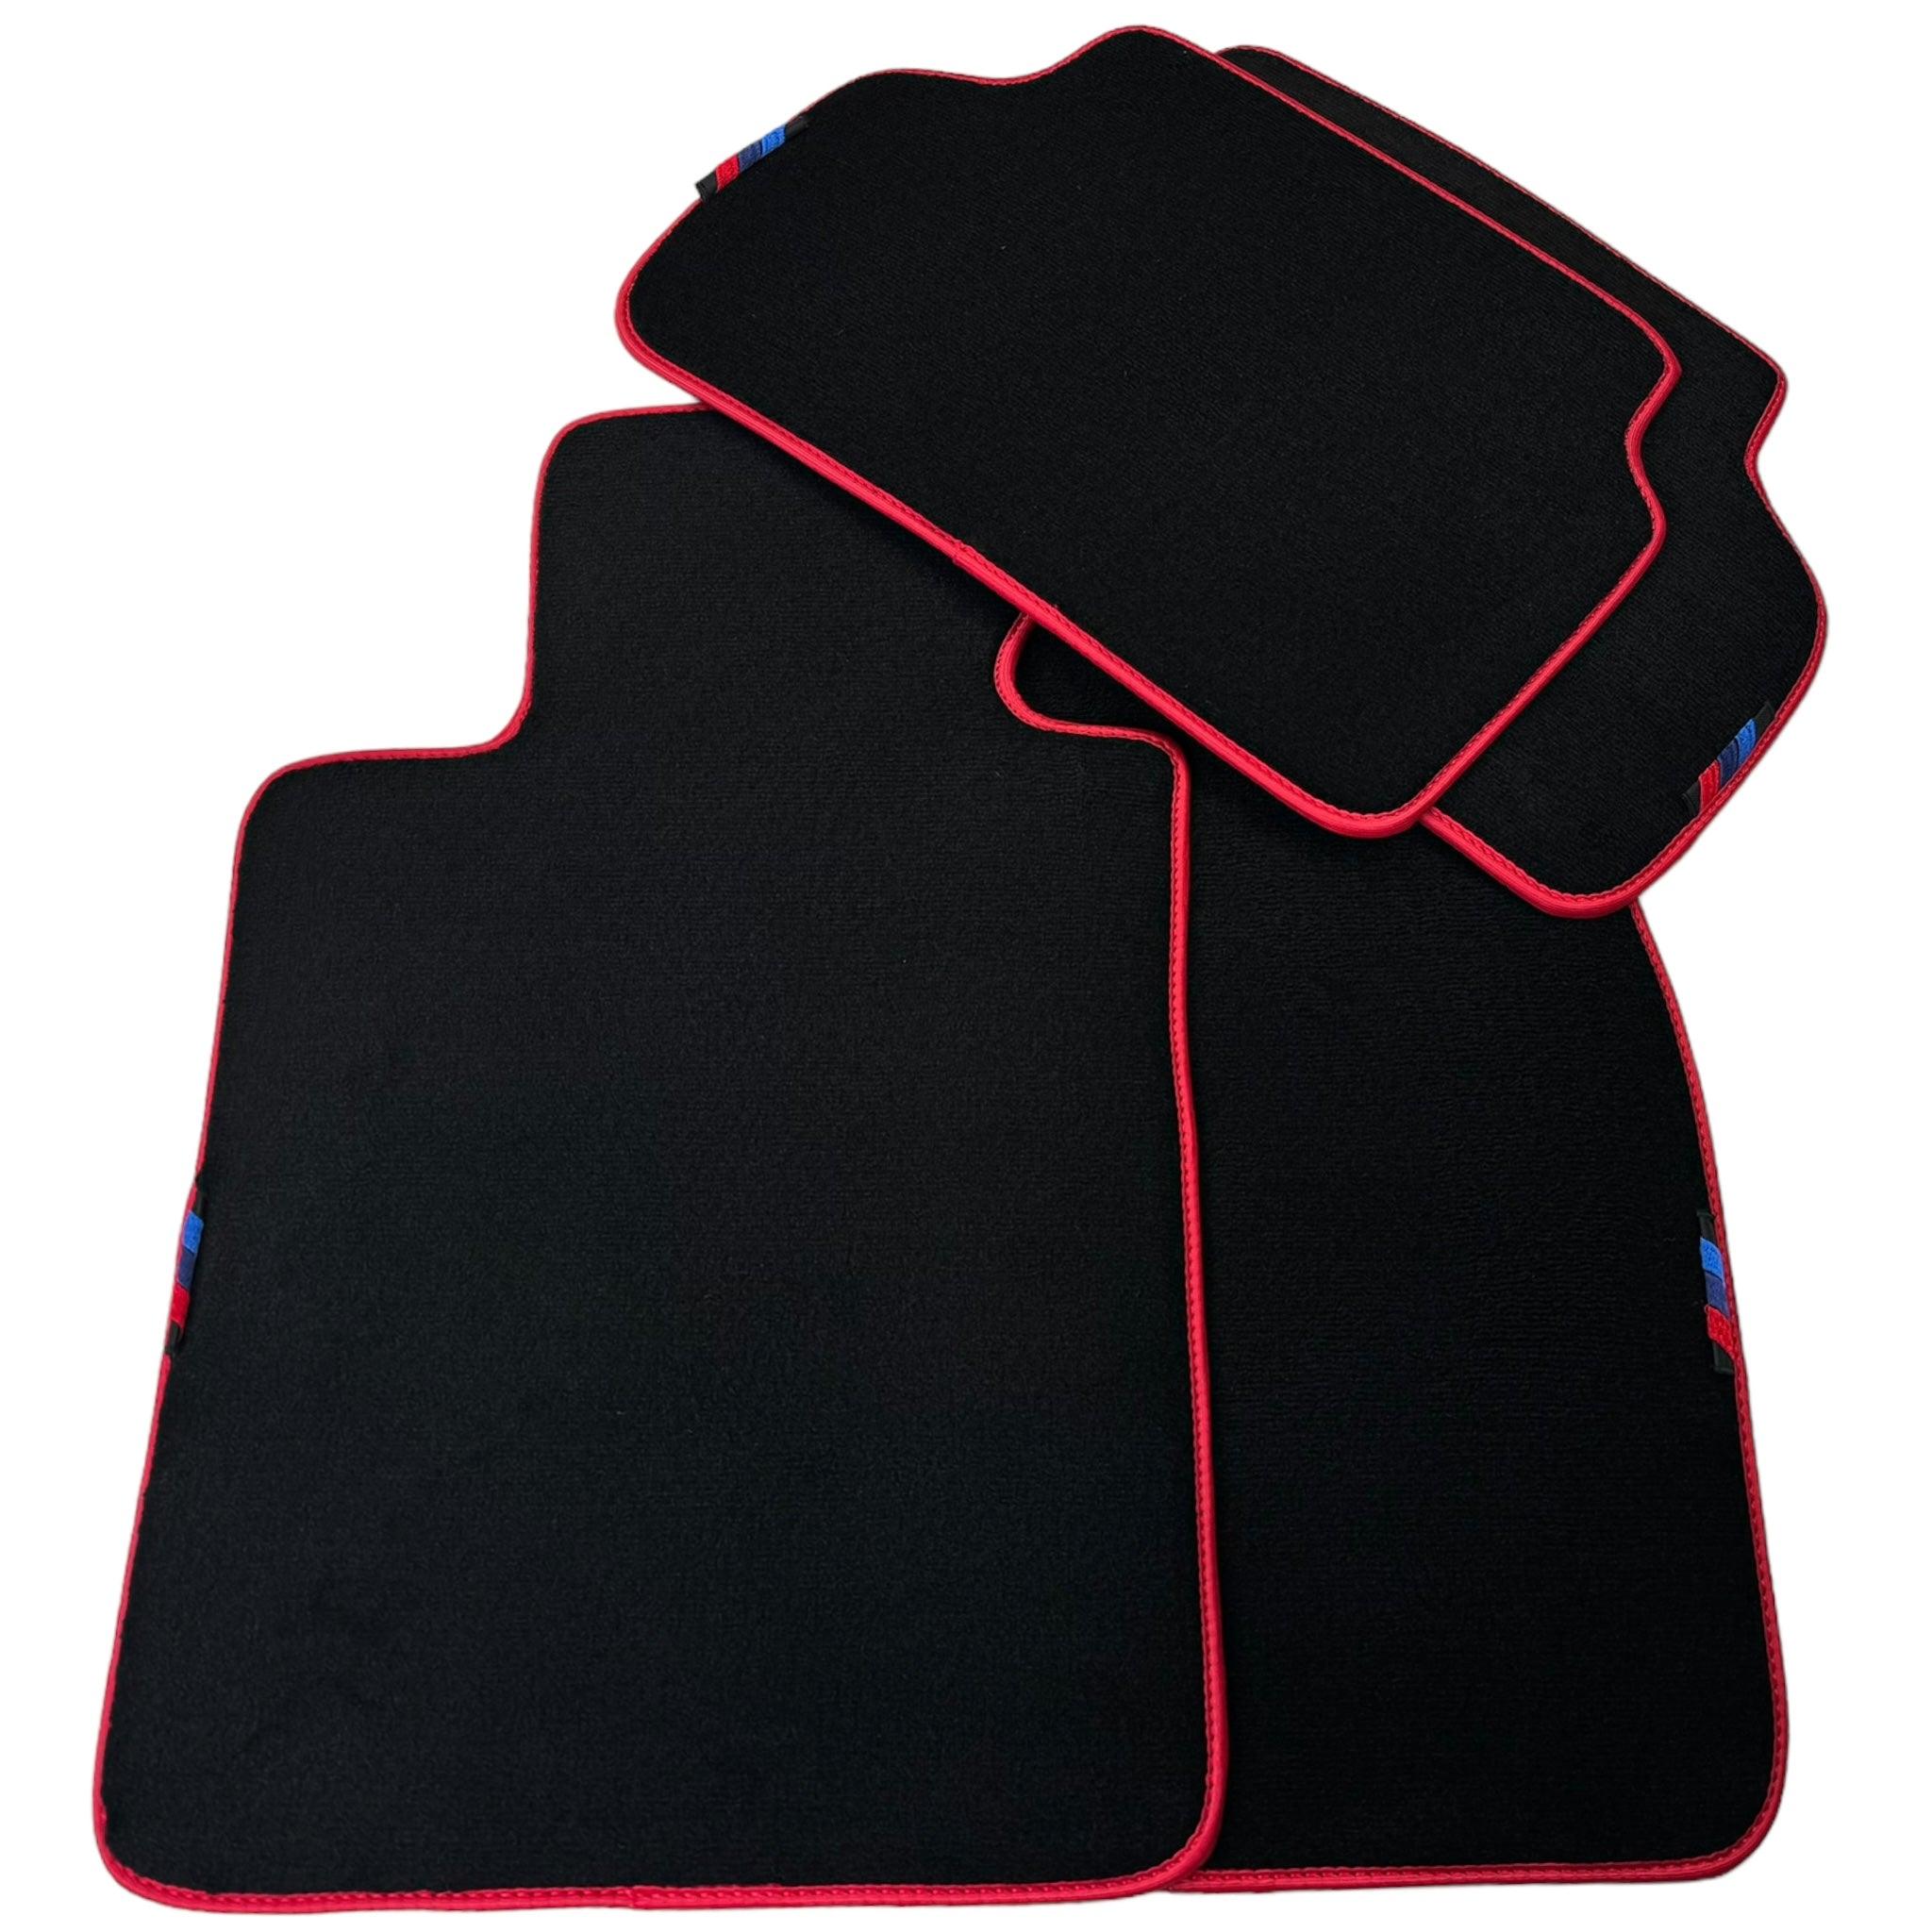 Black Floor Mats For BMW 1 Series E88 Convertible | Red Trim